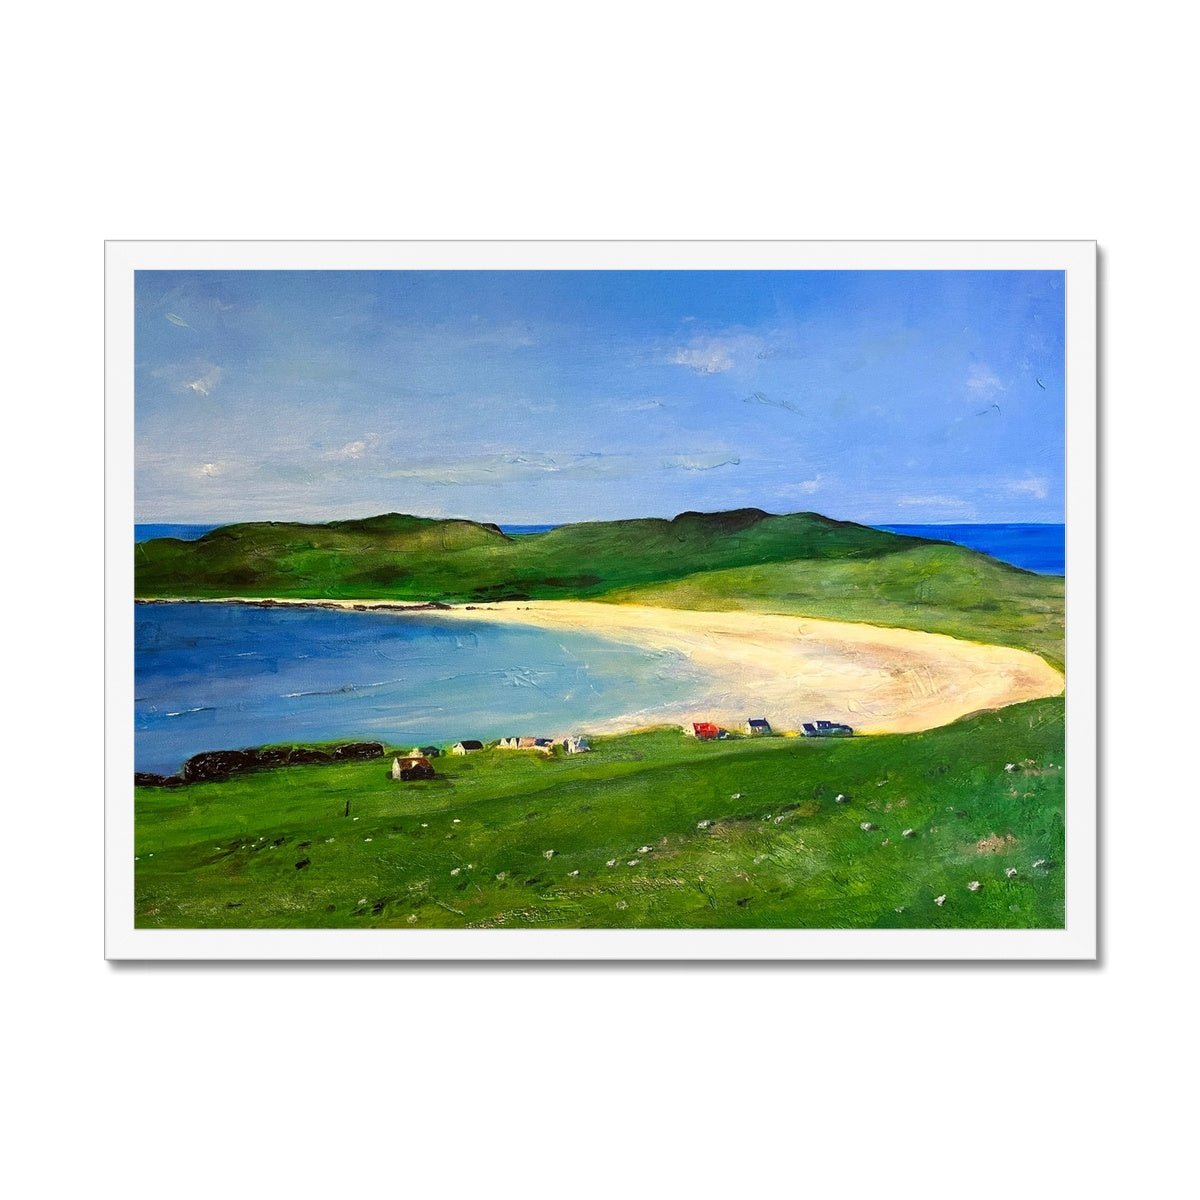 Balephuil Beach Tiree Painting | Framed Prints From Scotland-Framed Prints-Hebridean Islands Art Gallery-A2 Landscape-White Frame-Paintings, Prints, Homeware, Art Gifts From Scotland By Scottish Artist Kevin Hunter